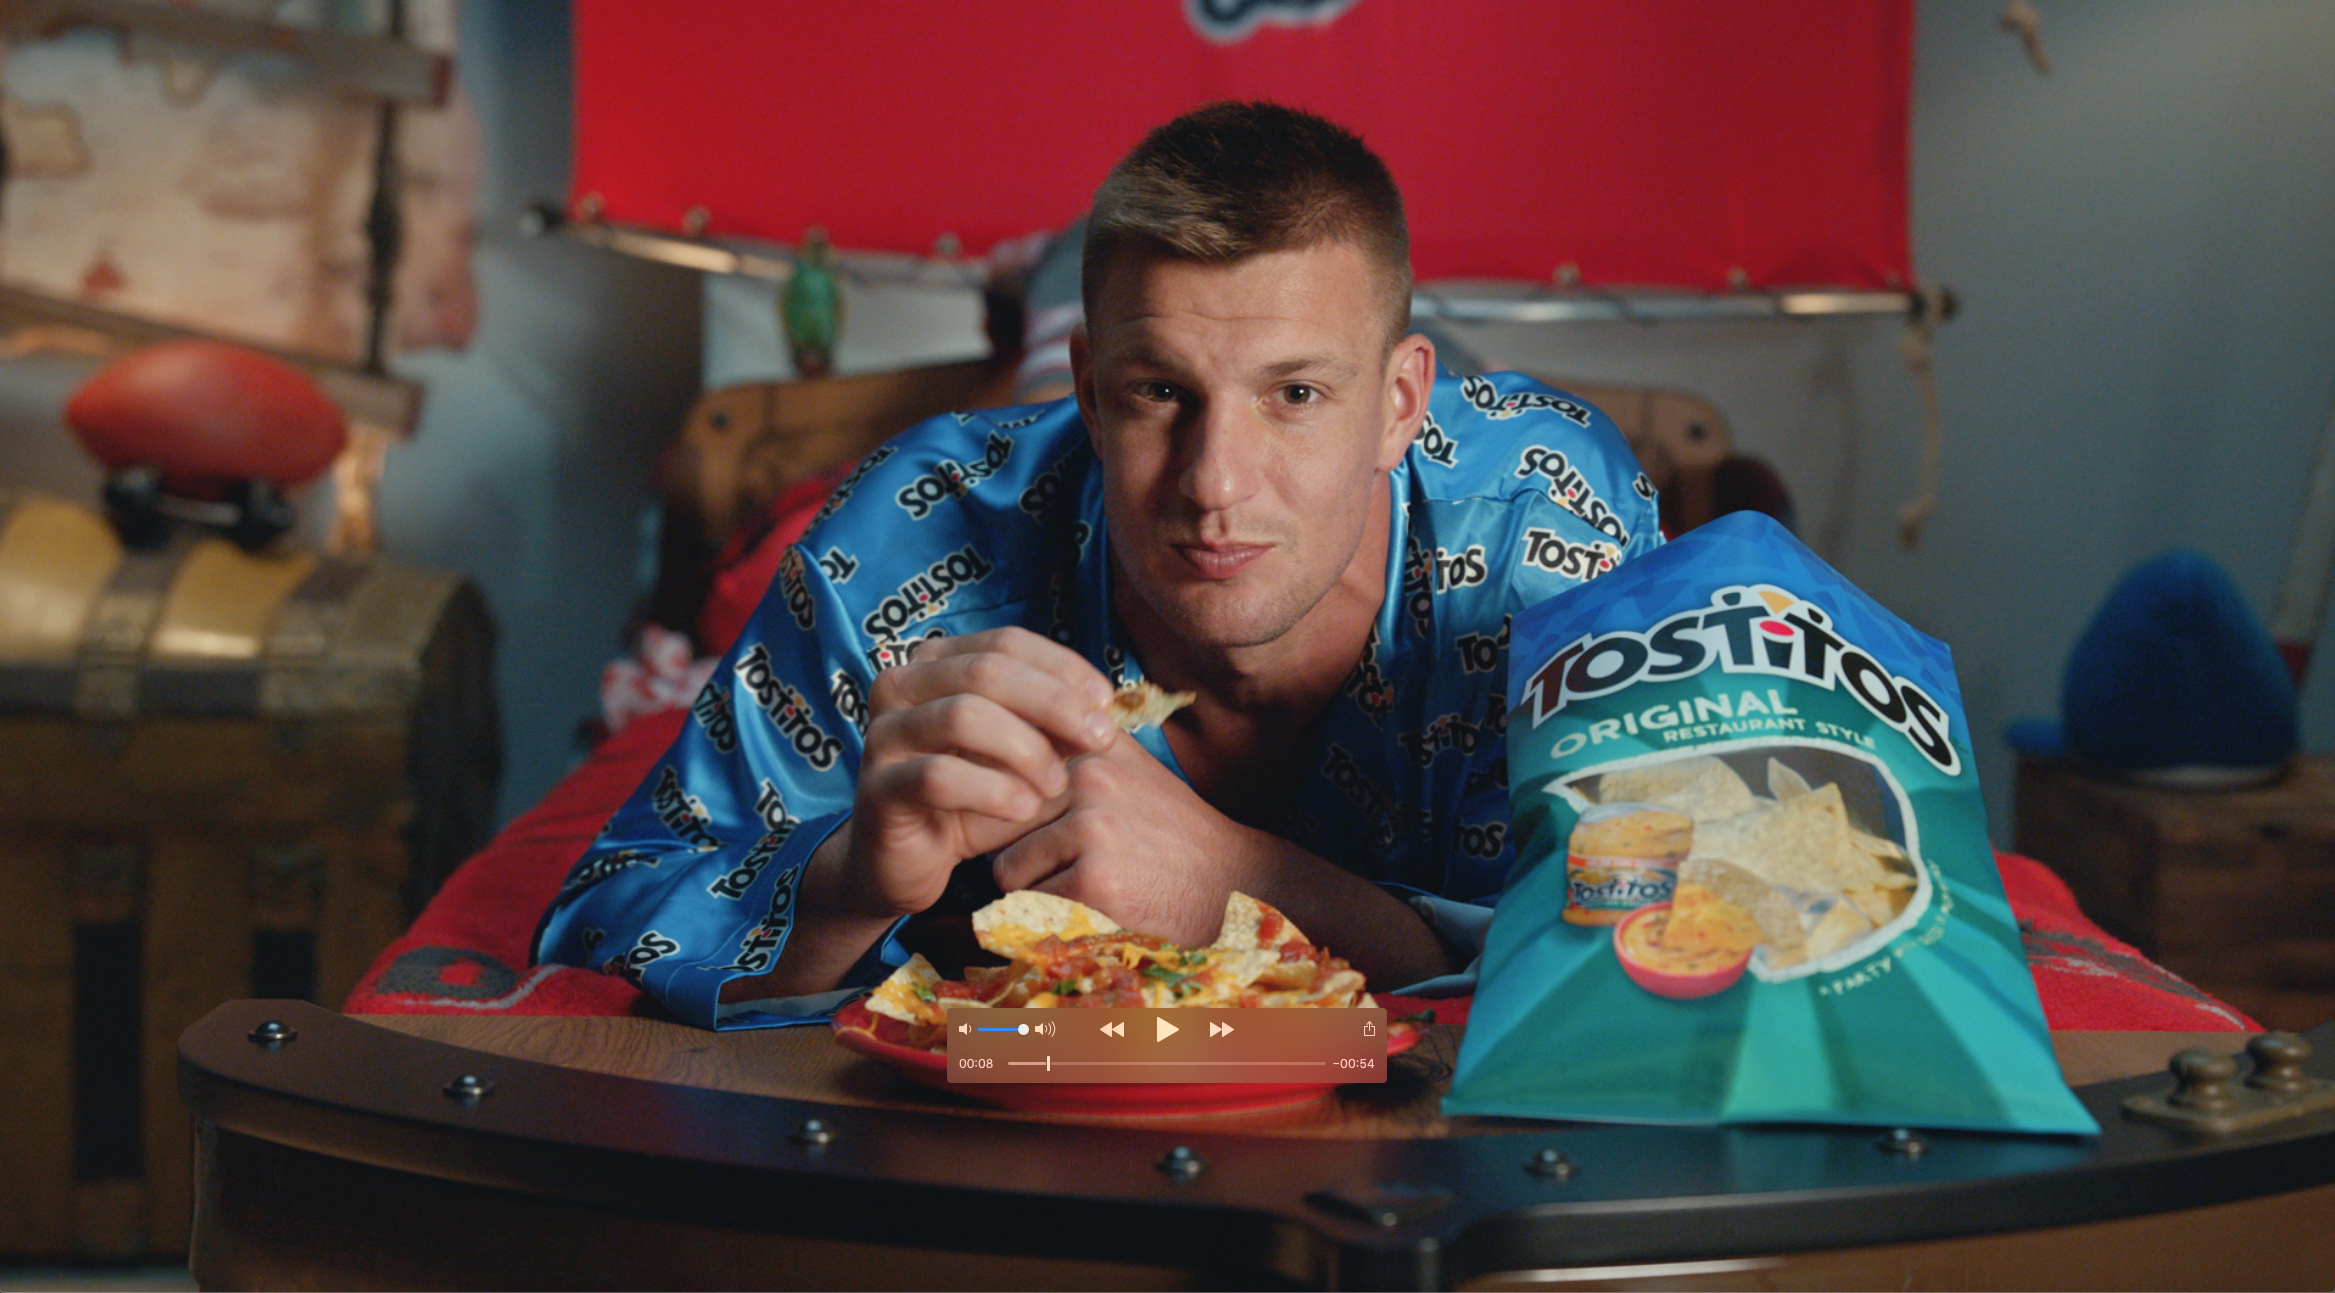 Frito-Lay’s new commercial features NFL pros and legends, including Tom Brady and Rob Gronkowski – both starring in their first commercial in a Tampa Bay uniform